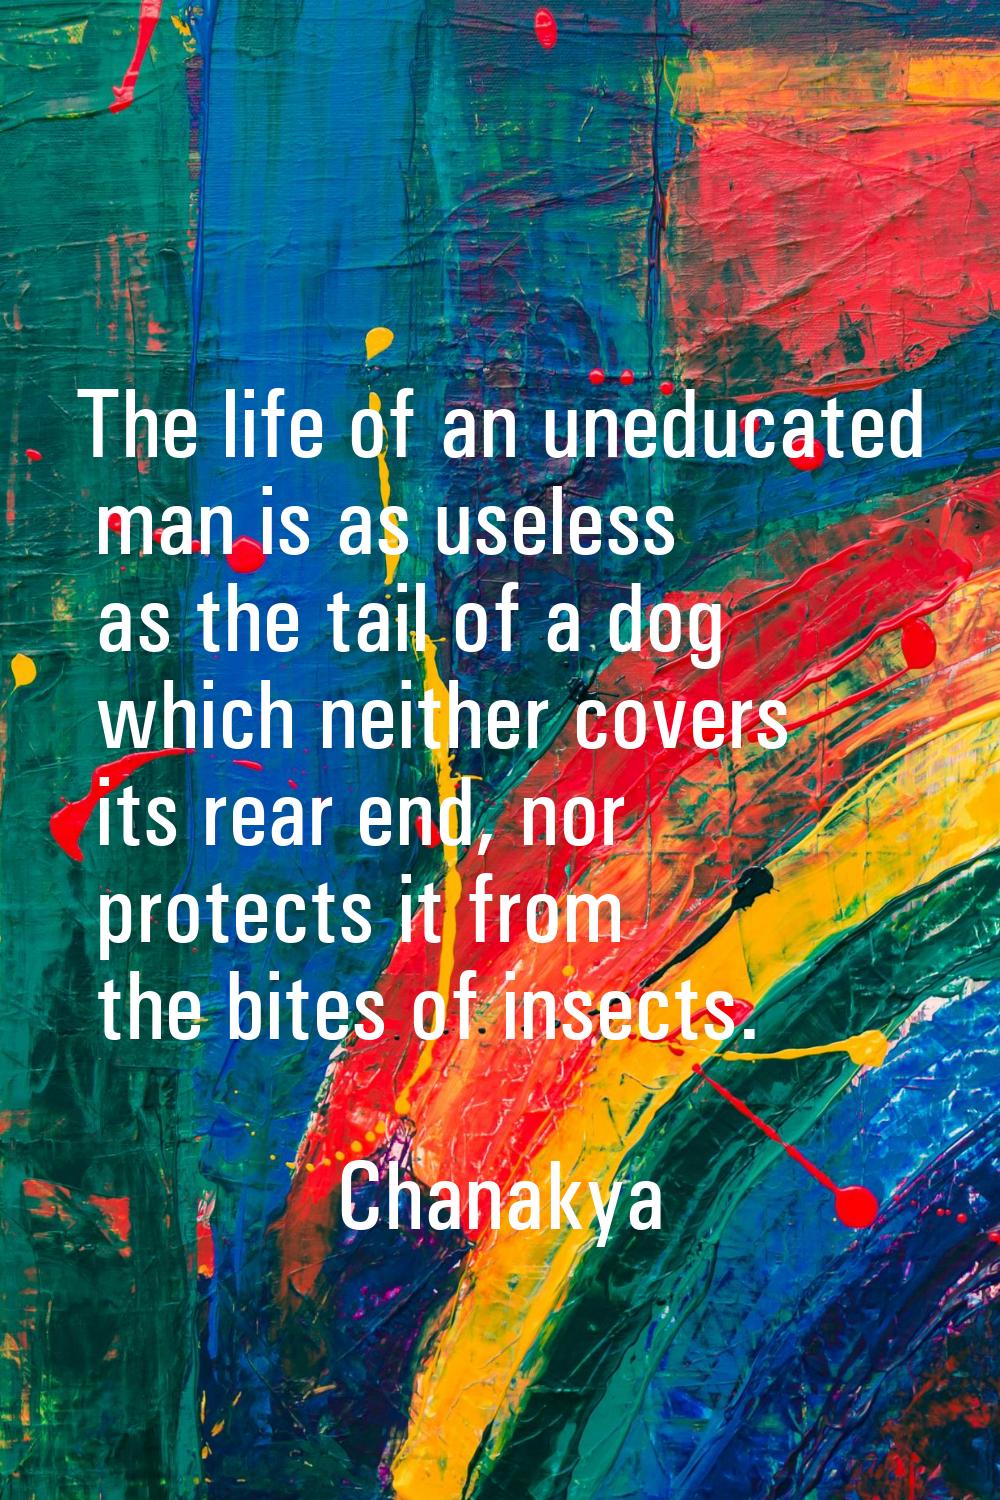 The life of an uneducated man is as useless as the tail of a dog which neither covers its rear end,